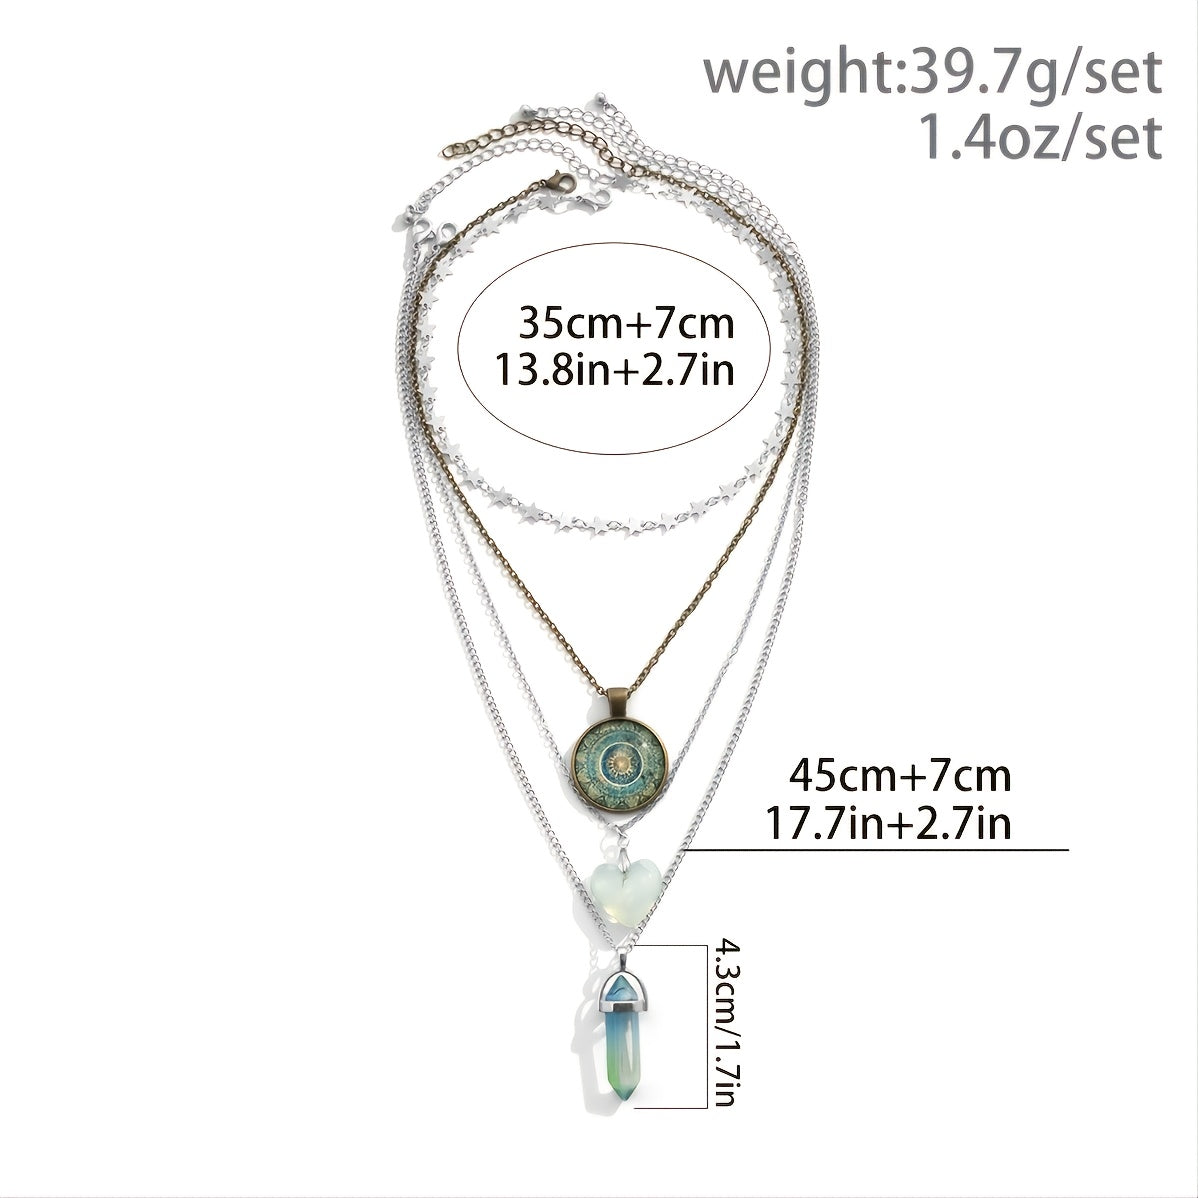 Add Vintage Glamour to Your Look with our Heart Crystal Pendant Multilayer Necklace Set - 4 Pieces